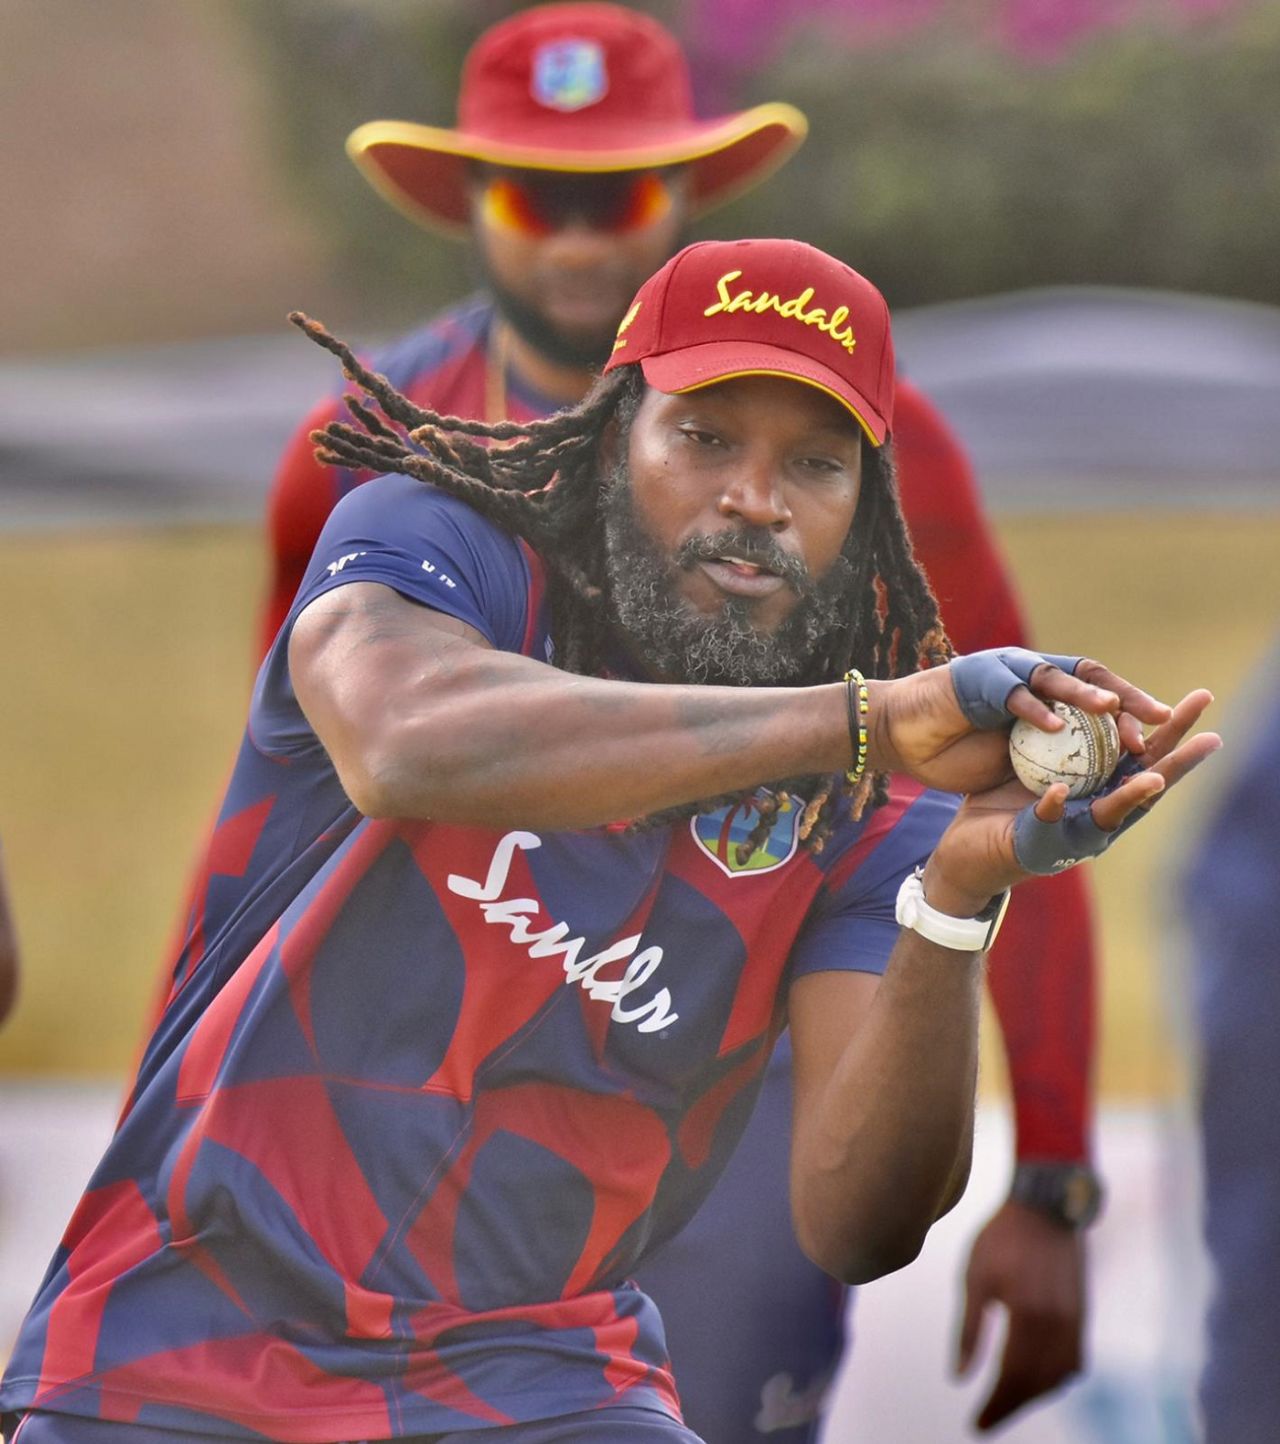 Chris Gayle takes part in a fielding drill, Antigua, March 2, 2021